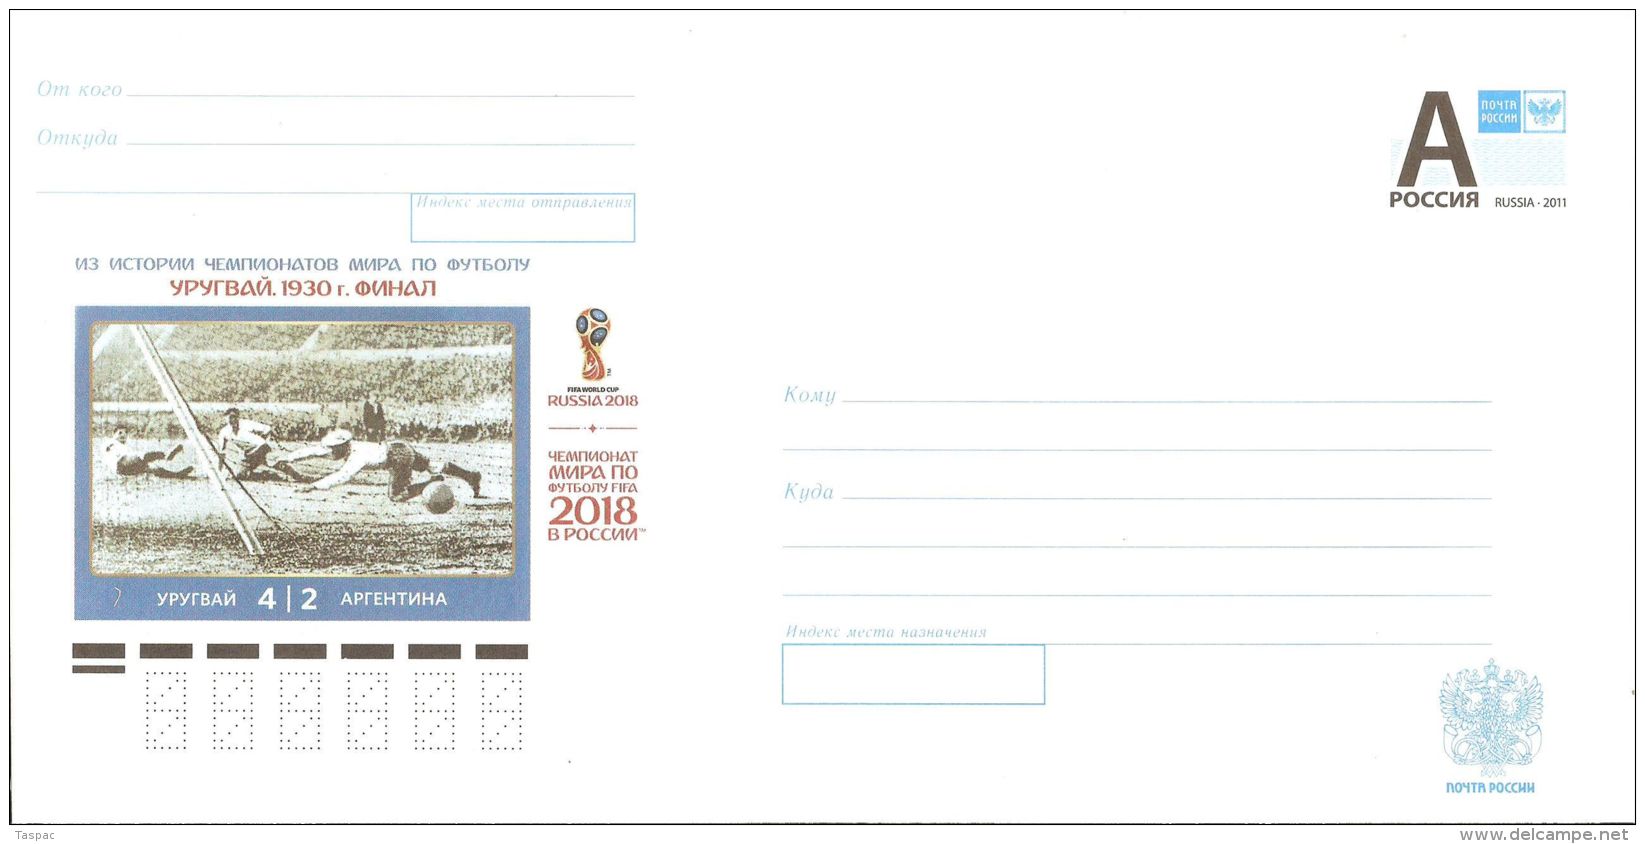 Russia 2015 # 148 Postal Stationery Cover Unused - History Of World Cup Soccer Championship, Uruguay 1930 - 2018 – Russland